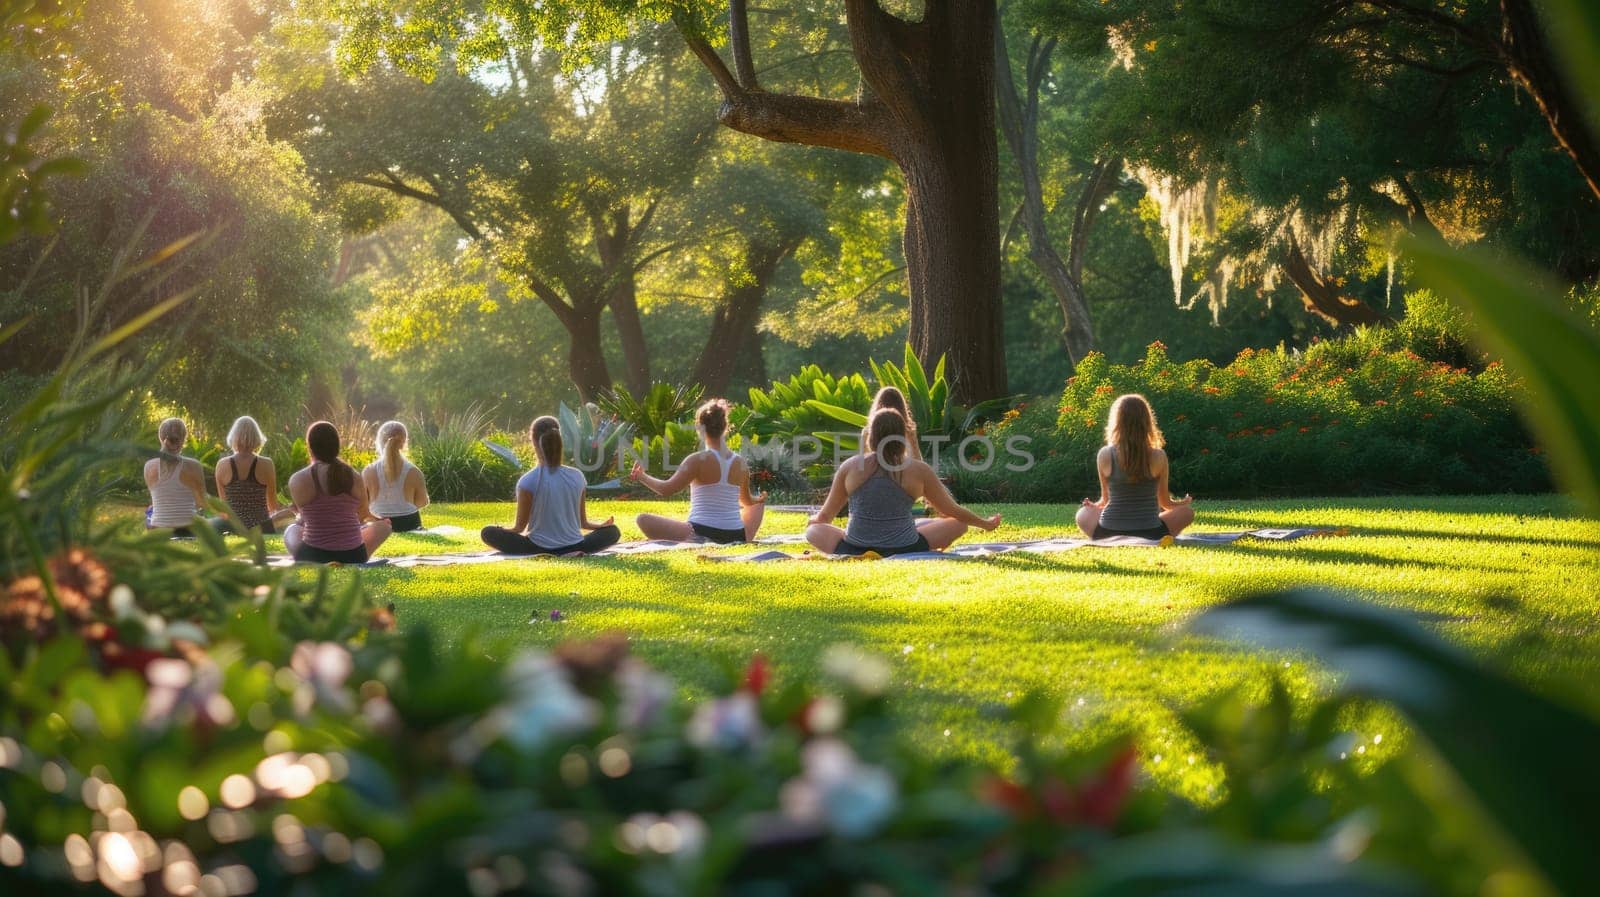 Outdoor Yoga Class in Lush Garden Setting AIG41 by biancoblue